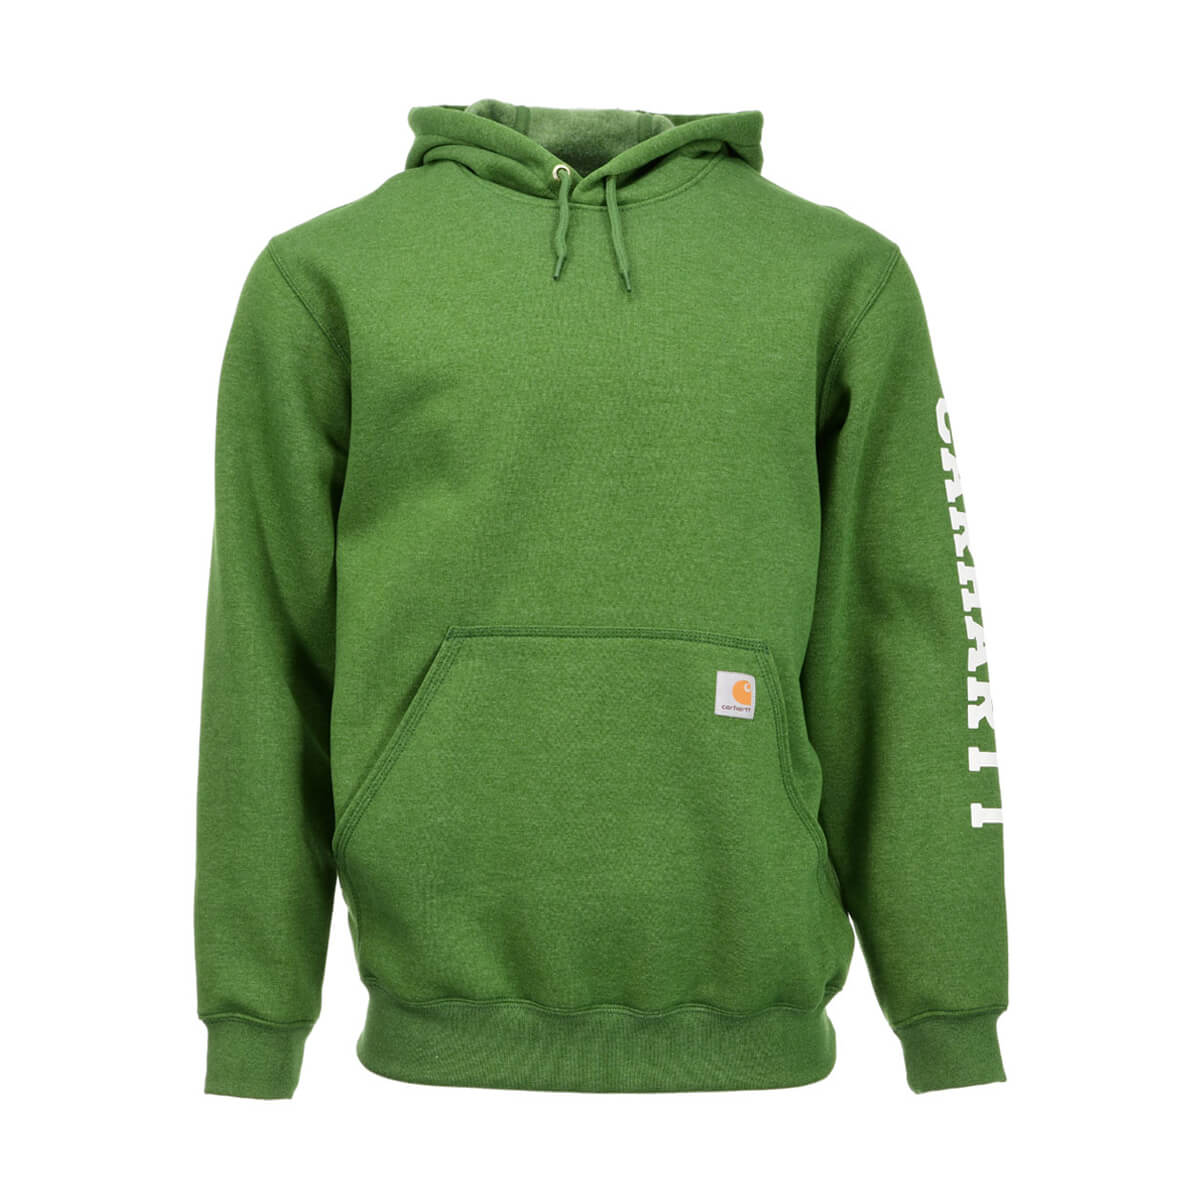 Carhartt Loose Fit Midweight Hooded Graphic Sweatshirt - Green